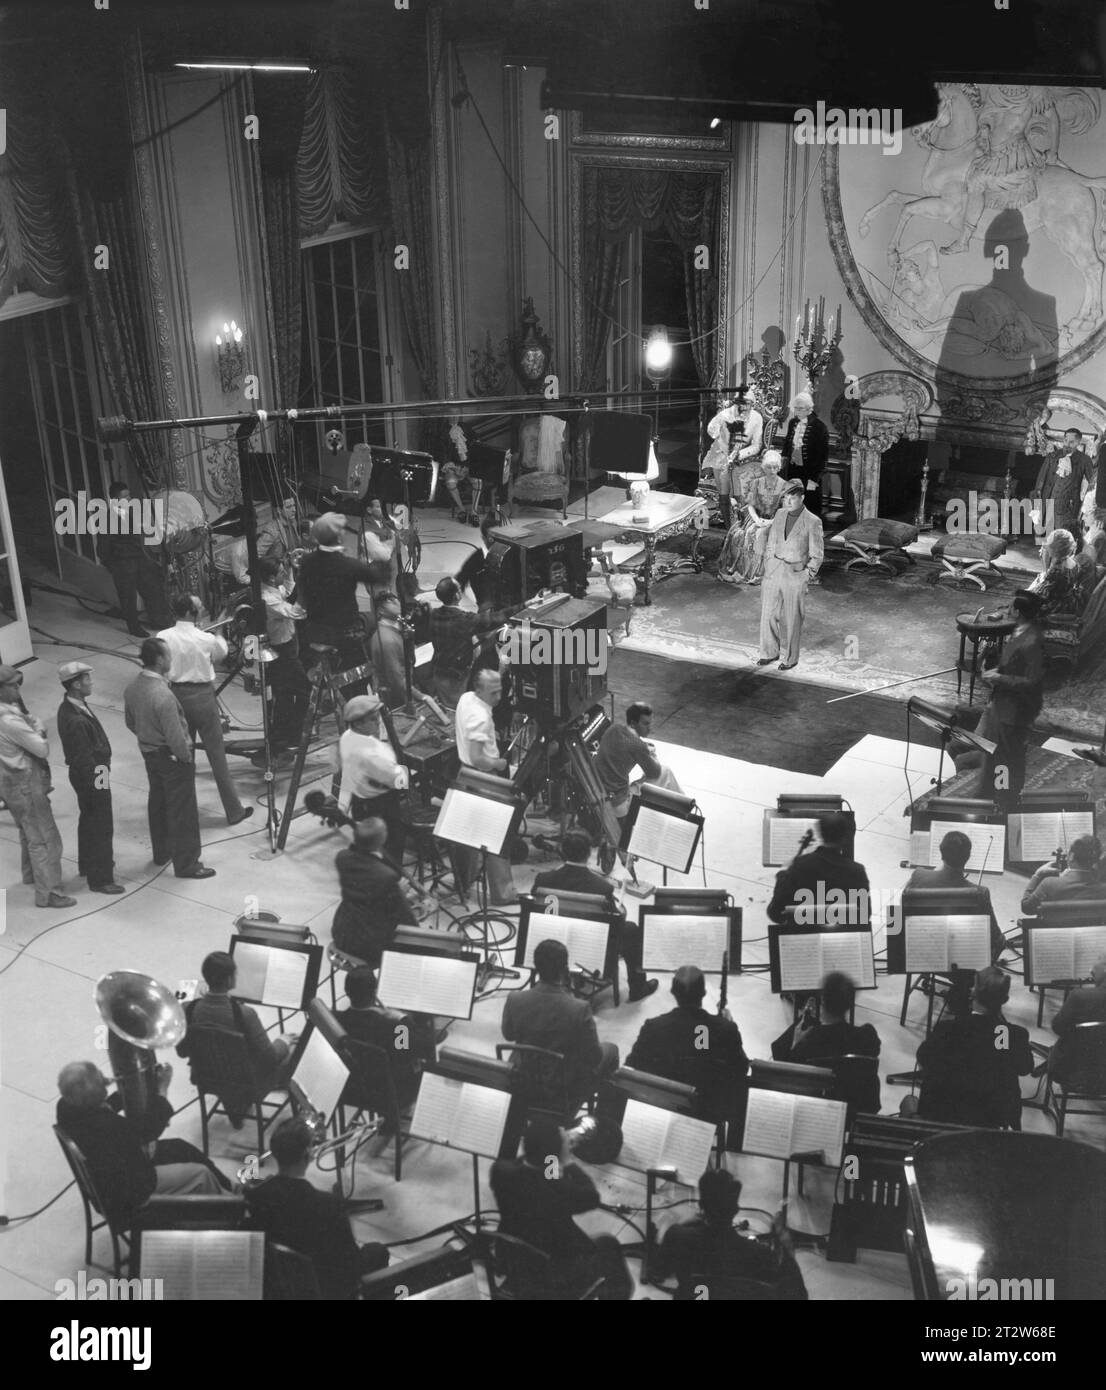 MAURICE CHEVALIER filming LOVE ME TONIGHT 1932 with the studio orchestra on the sound stage at Paramount Studios. Director ROUBEN MAMOULIAN From the Play by LEOPOLD MARCHAND and PAUL ARMONT Costume Design by TRAVIS BANTON and EDITH HEAD Music by RICHARD RODGERS and Lyrics by LORENZ HART Paramount Pictures Stock Photo